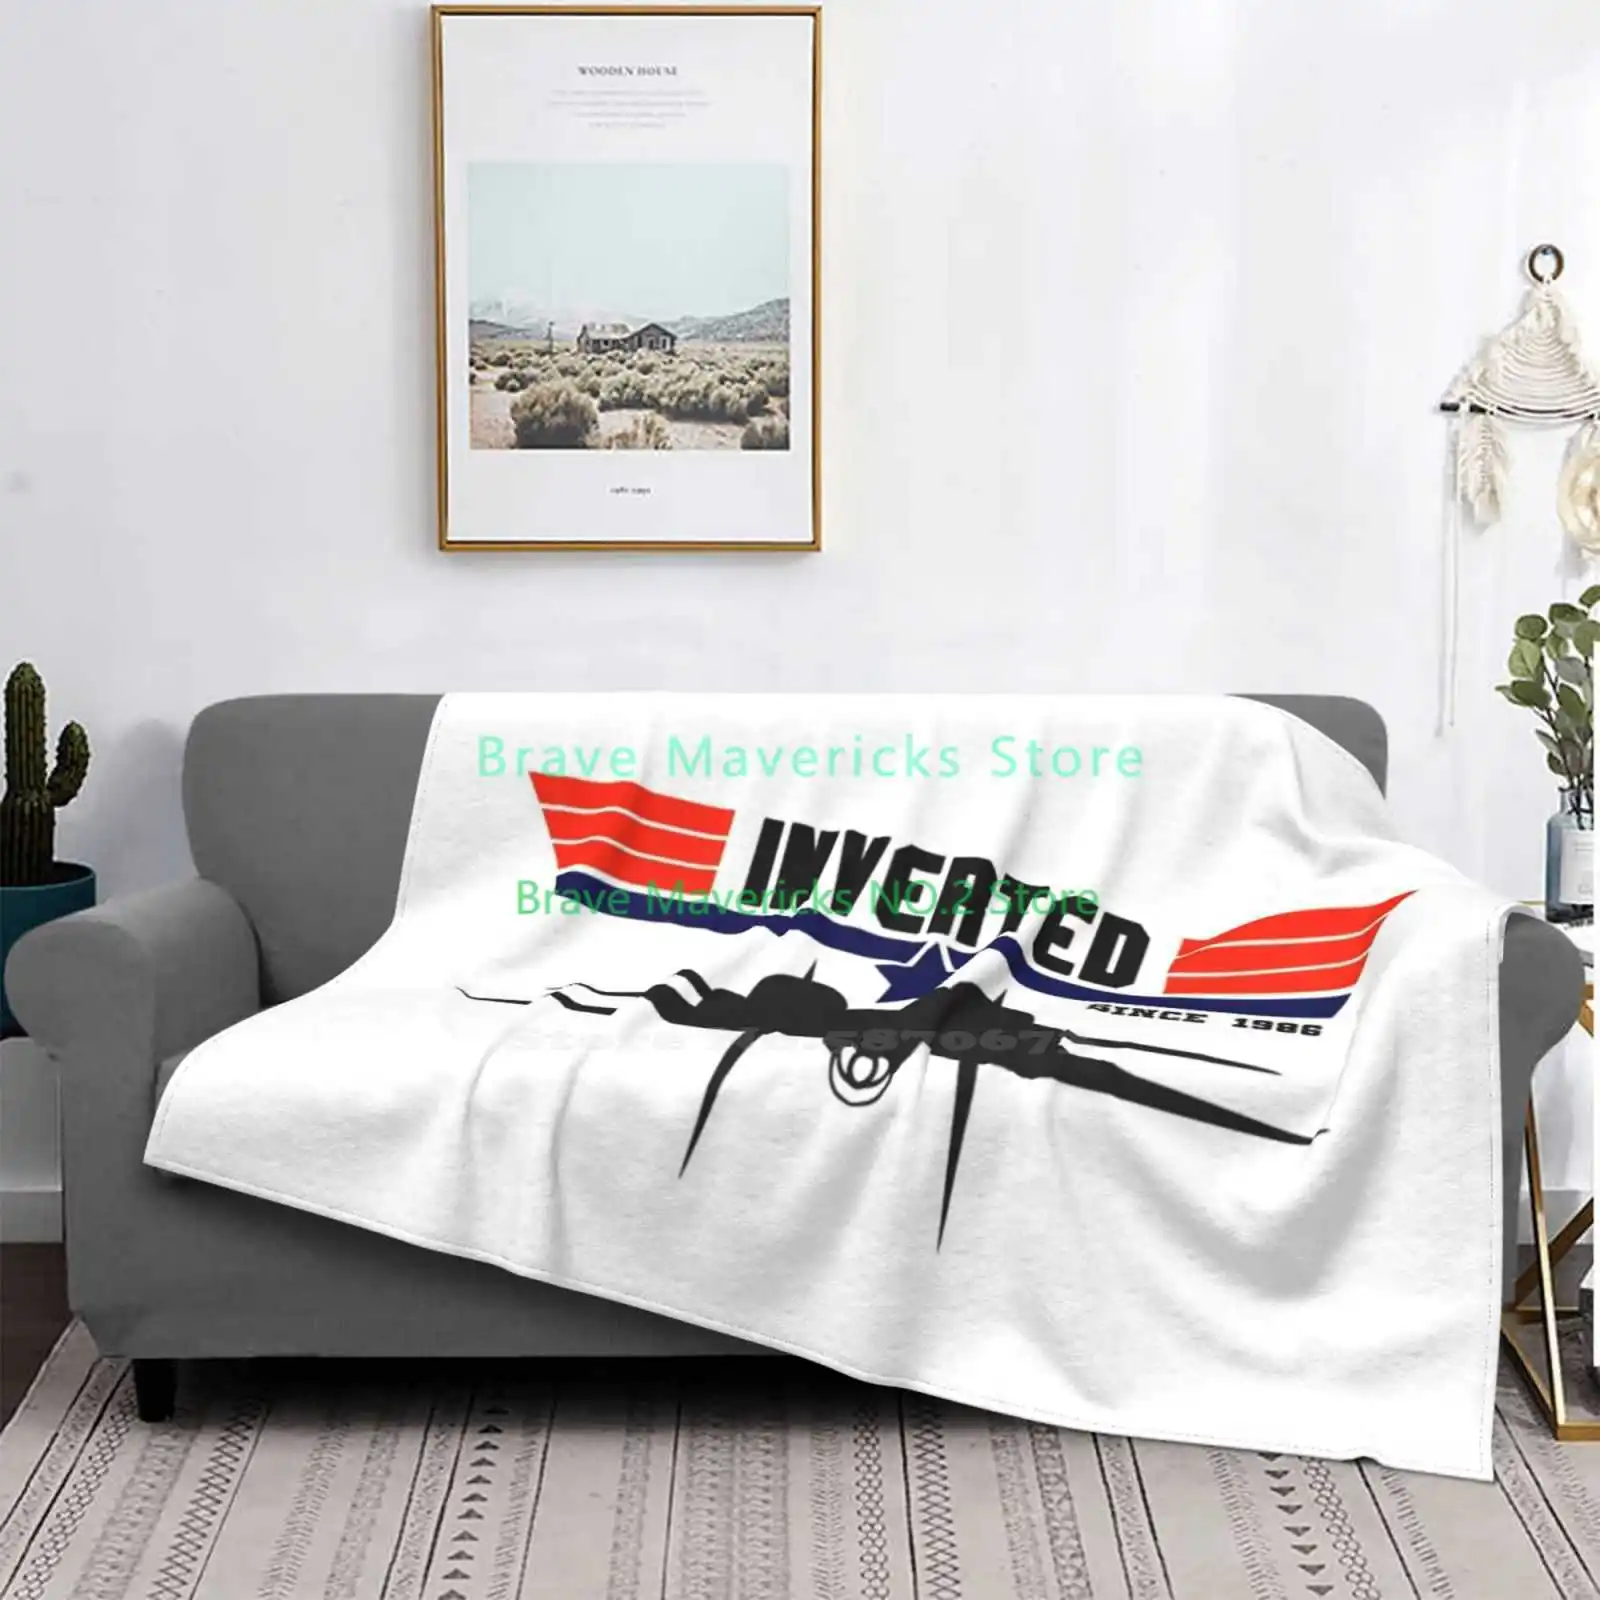 

Inverted Since 1986 F14 Tomcat New Selling Custom Print Flannel Soft Blanket F14 Tomcat 80S 80S Movies Because I Was Inverted